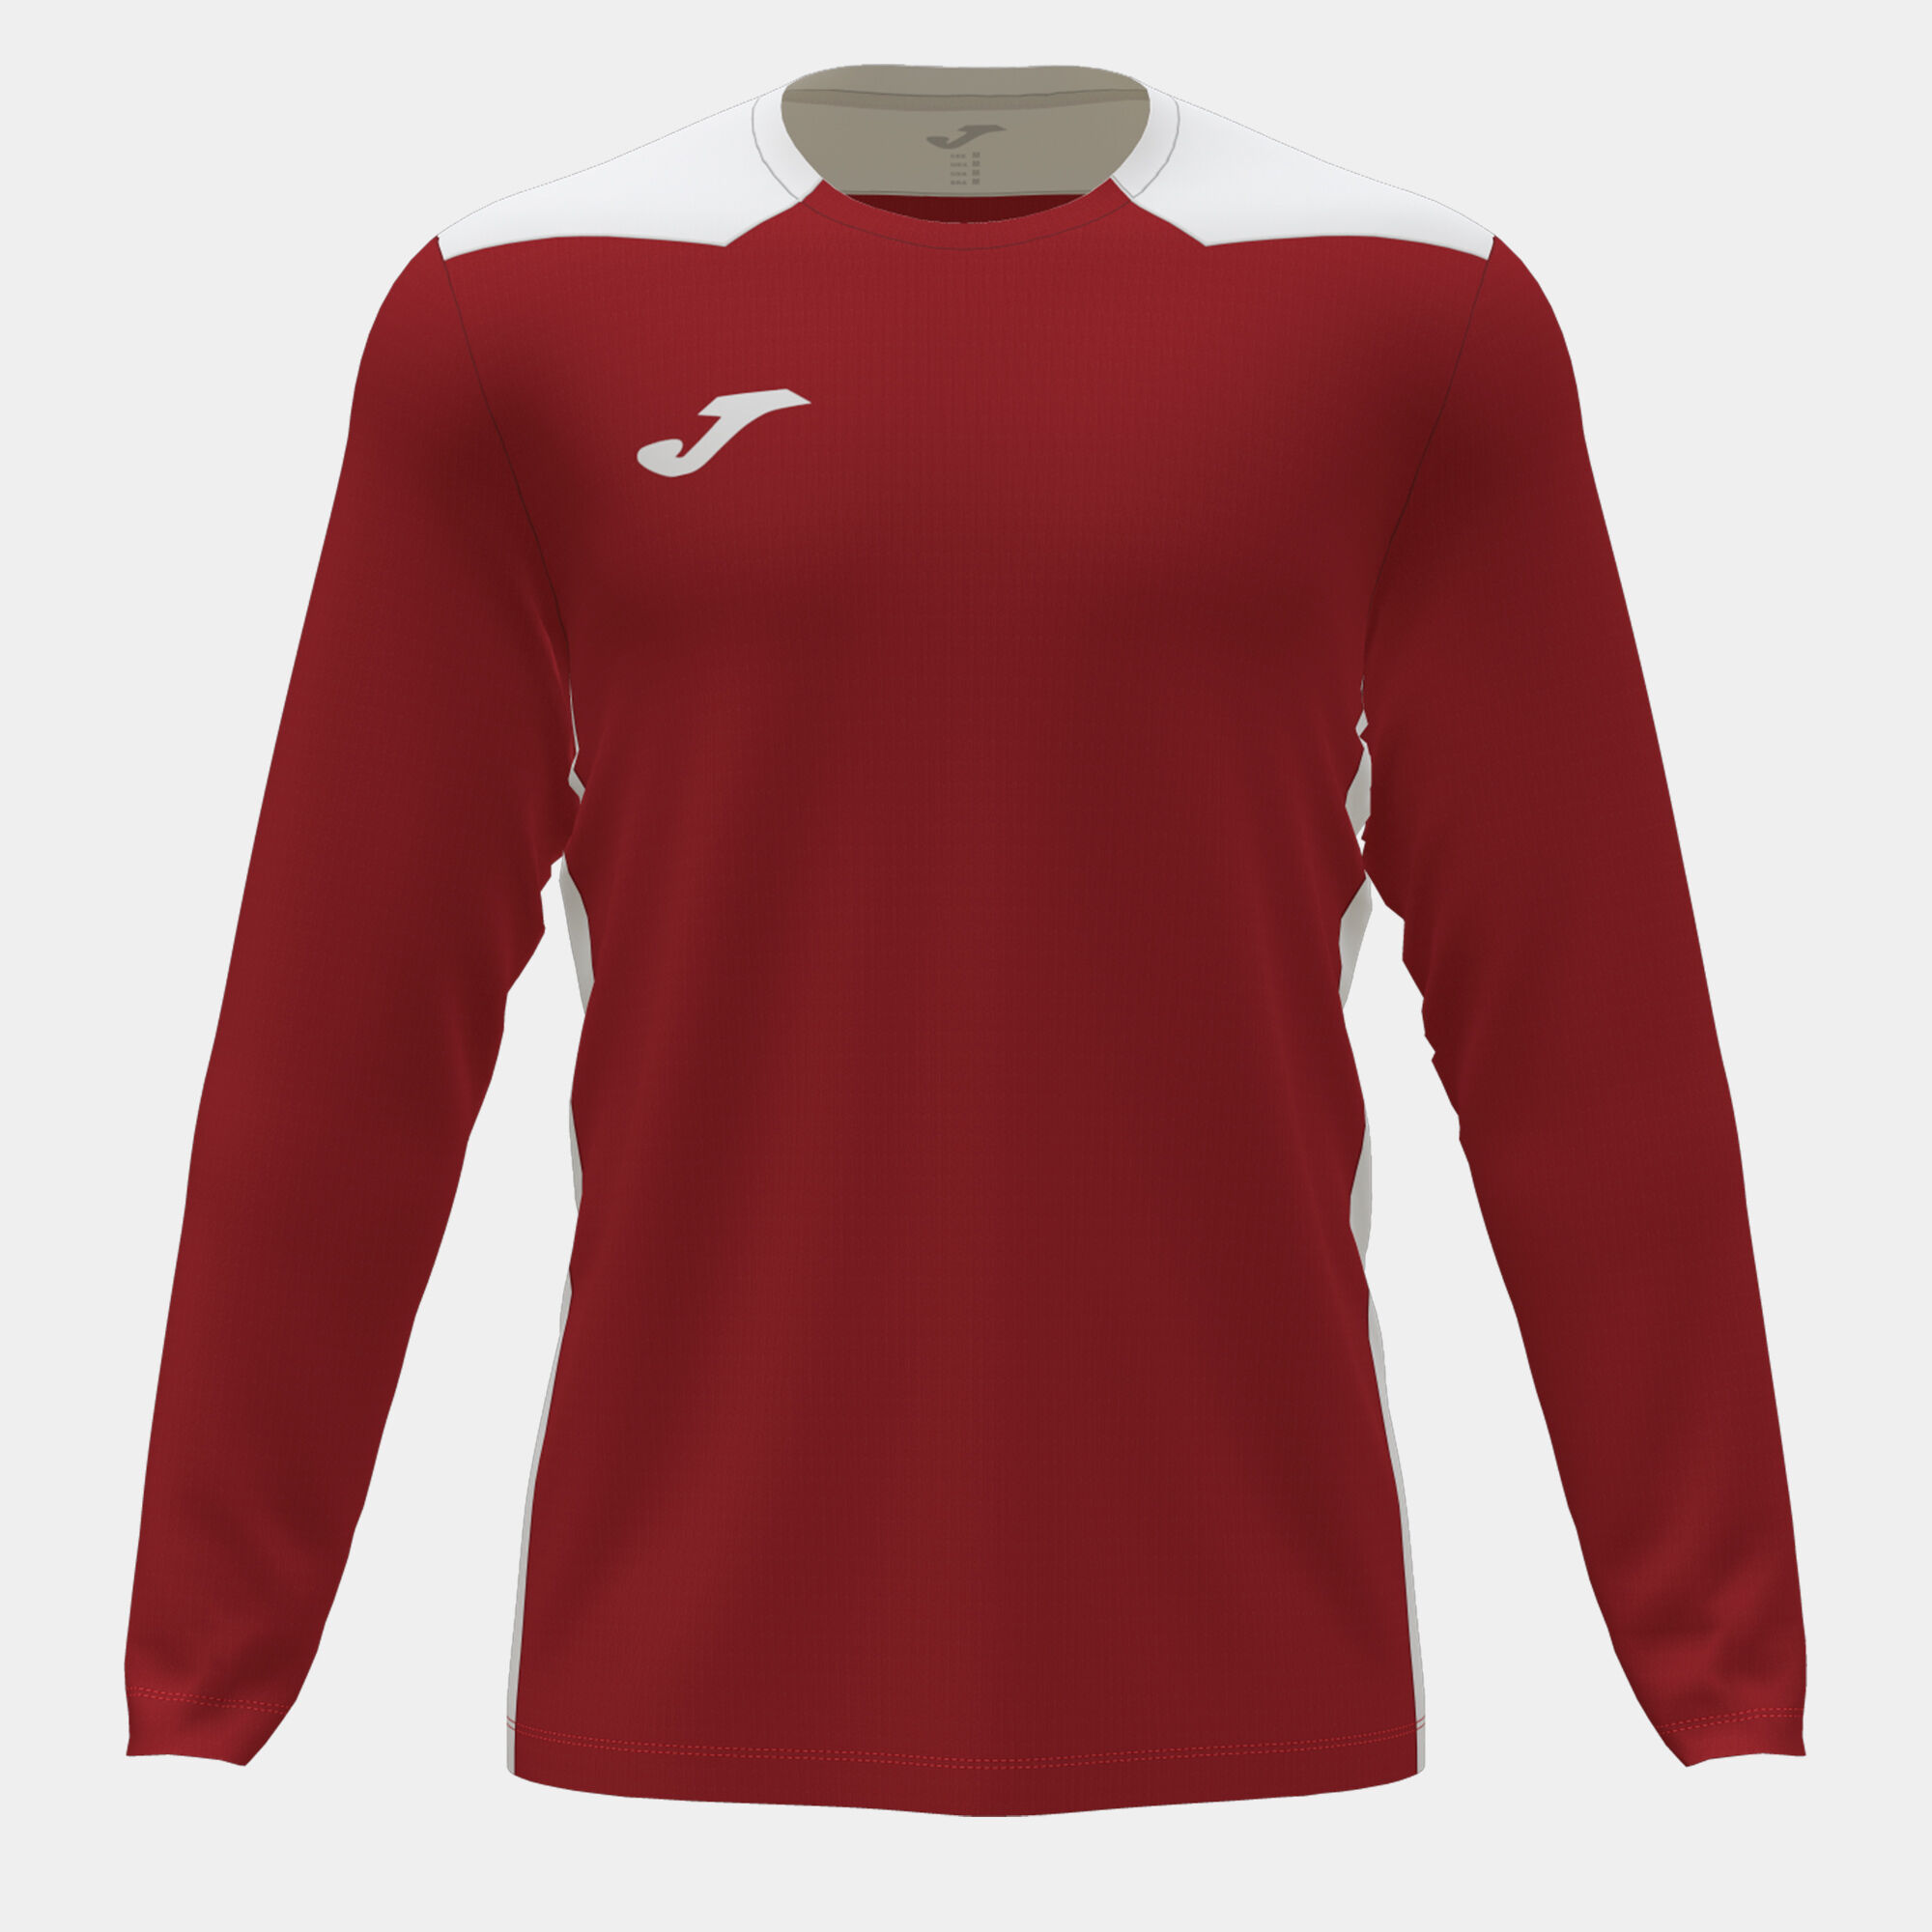 Maillot manches longues homme Championship VI rouge blanc